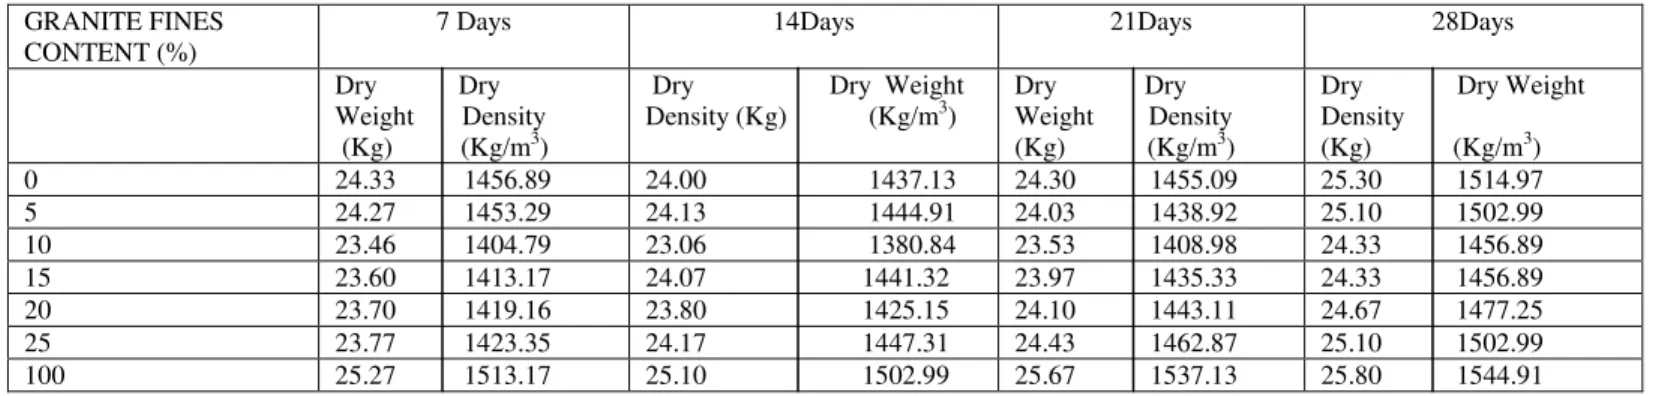 Table 3: Weight and Dry Density